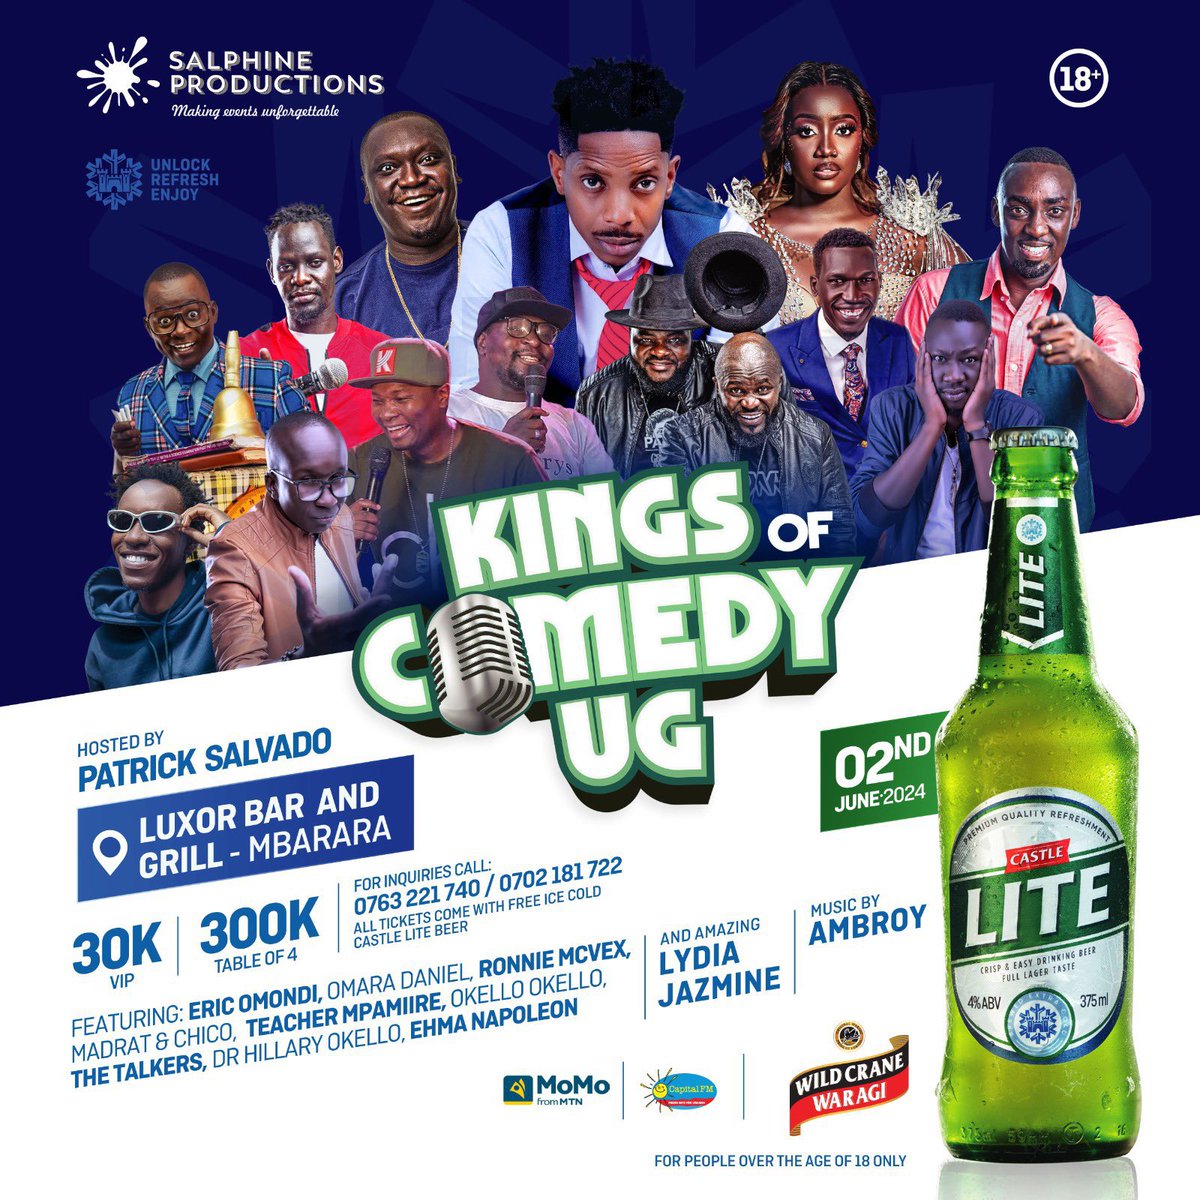 A Day In Another Day worthy a celebration 🍾... Mbarara Get ready 4 #KingsOfComedyUg #MbararaEdition 💥💥 this Sun.2nd.June.24 Hosted by: @idringp Ft @ericomondi_ from Kenya 🇰🇪 & the beautiful @LydiahJazmine @chikoandmadrat Powered by: @CastleLiteUg @WildCraneGin